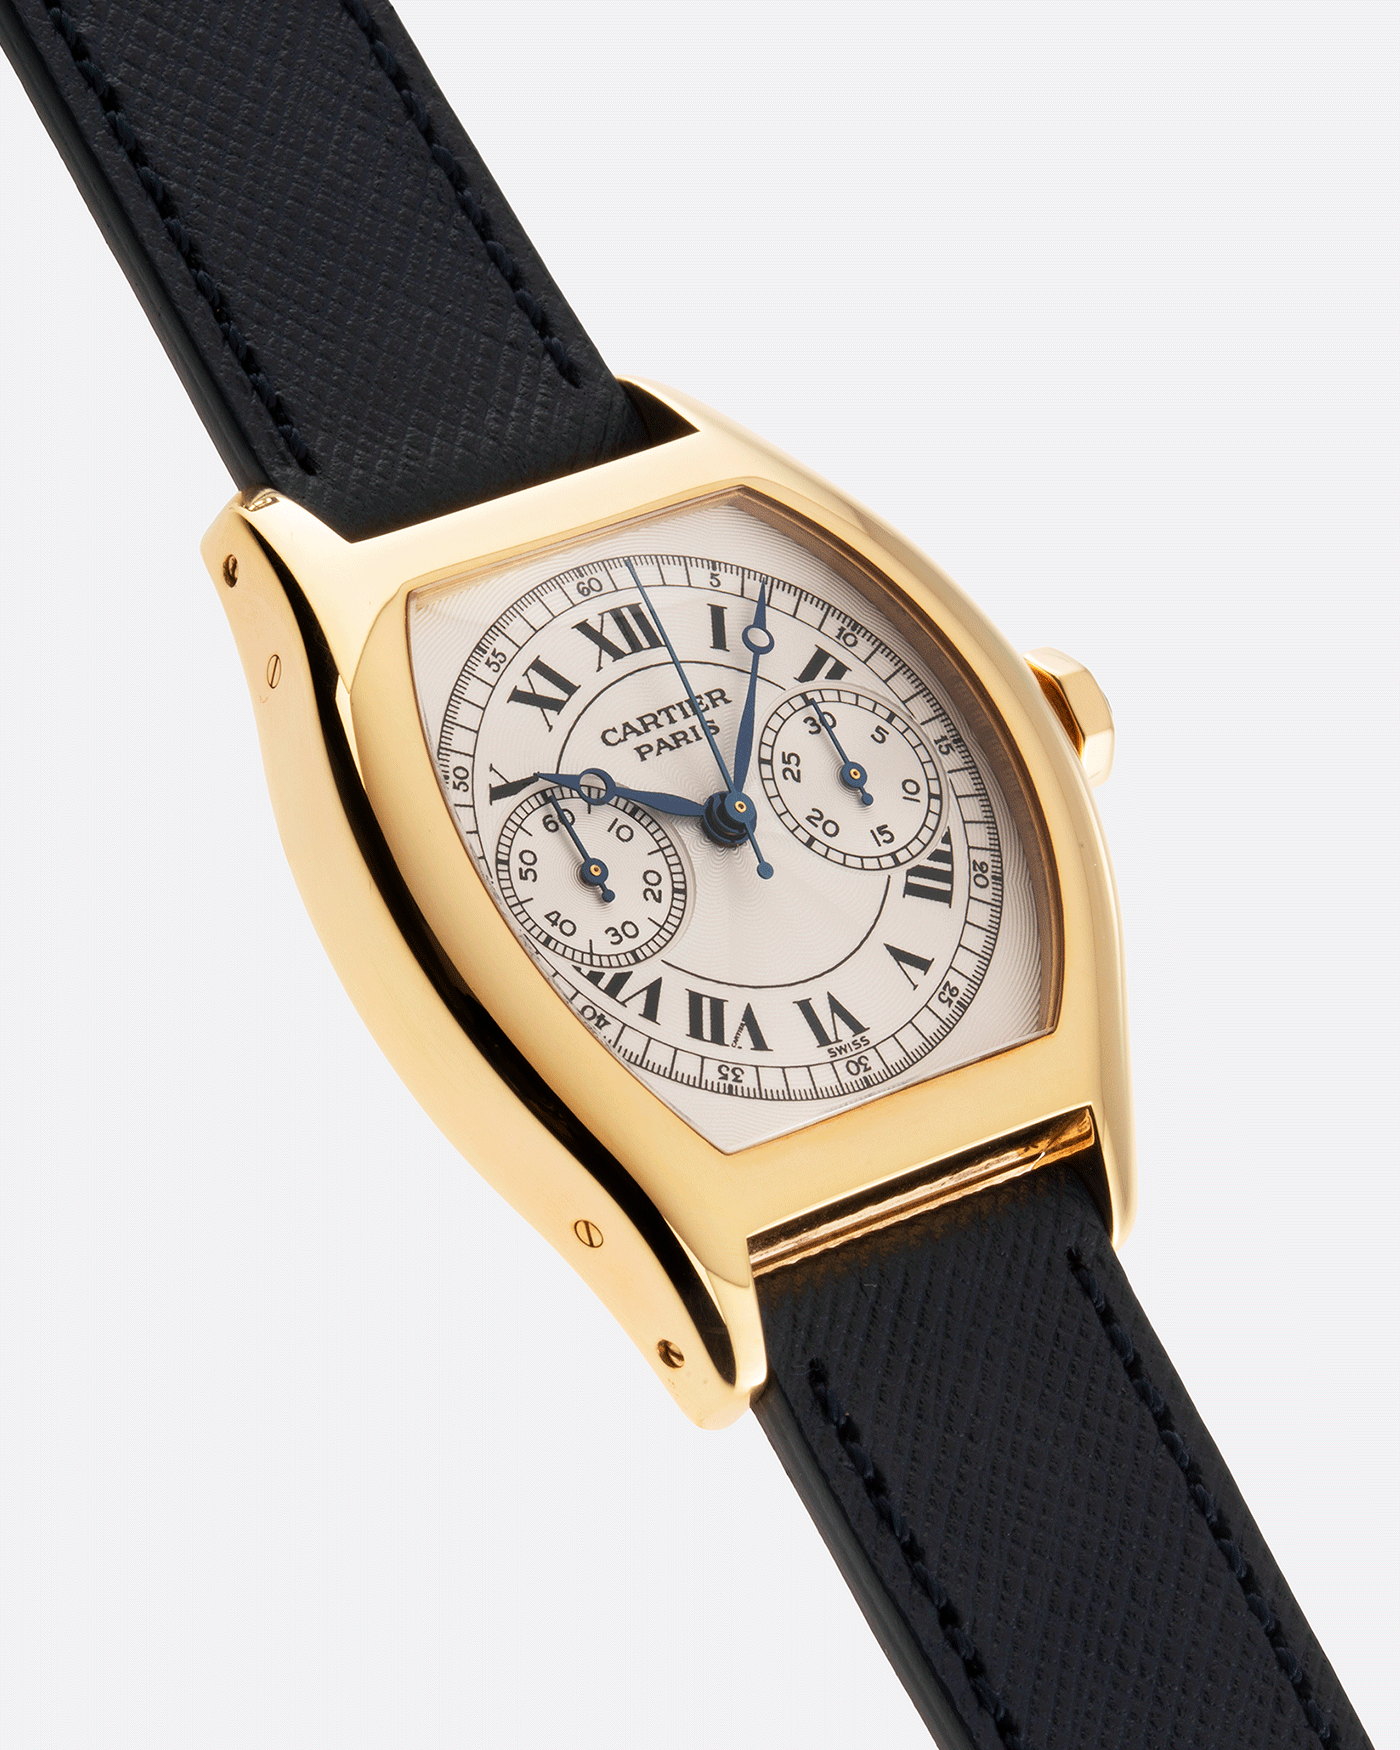 Brand: Cartier Year: 2000’s Model: CPCP Collection Prive Tortue Monopoussoir Reference: 2356E Material: 18k Yellow Gold Movement: THA Cal. 045MC Case Diameter: 43 x 35 mm Strap: Molequin Navy Blue Textured Calf with 18k Cartier Yellow Gold Deployant